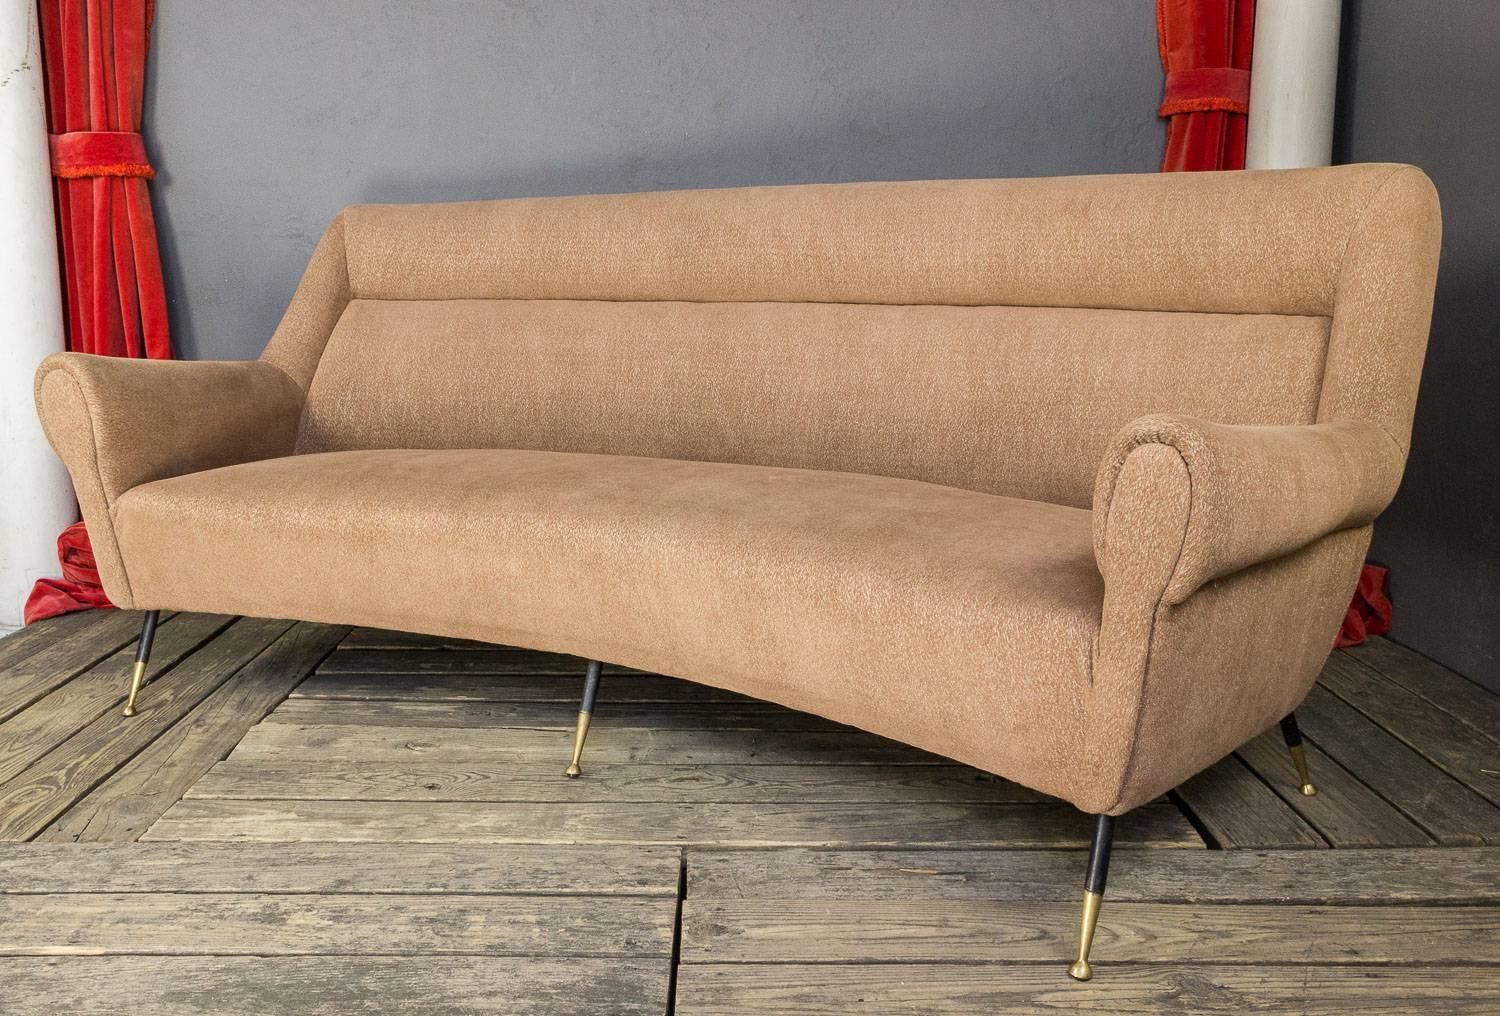 Unusual sofa with gracious curved back and newly upholstered in a beige chenille fabric. Attributed to Minotti.

RENTAL ONLY INVENTORY PIECE, NOT FOR SALE.

          